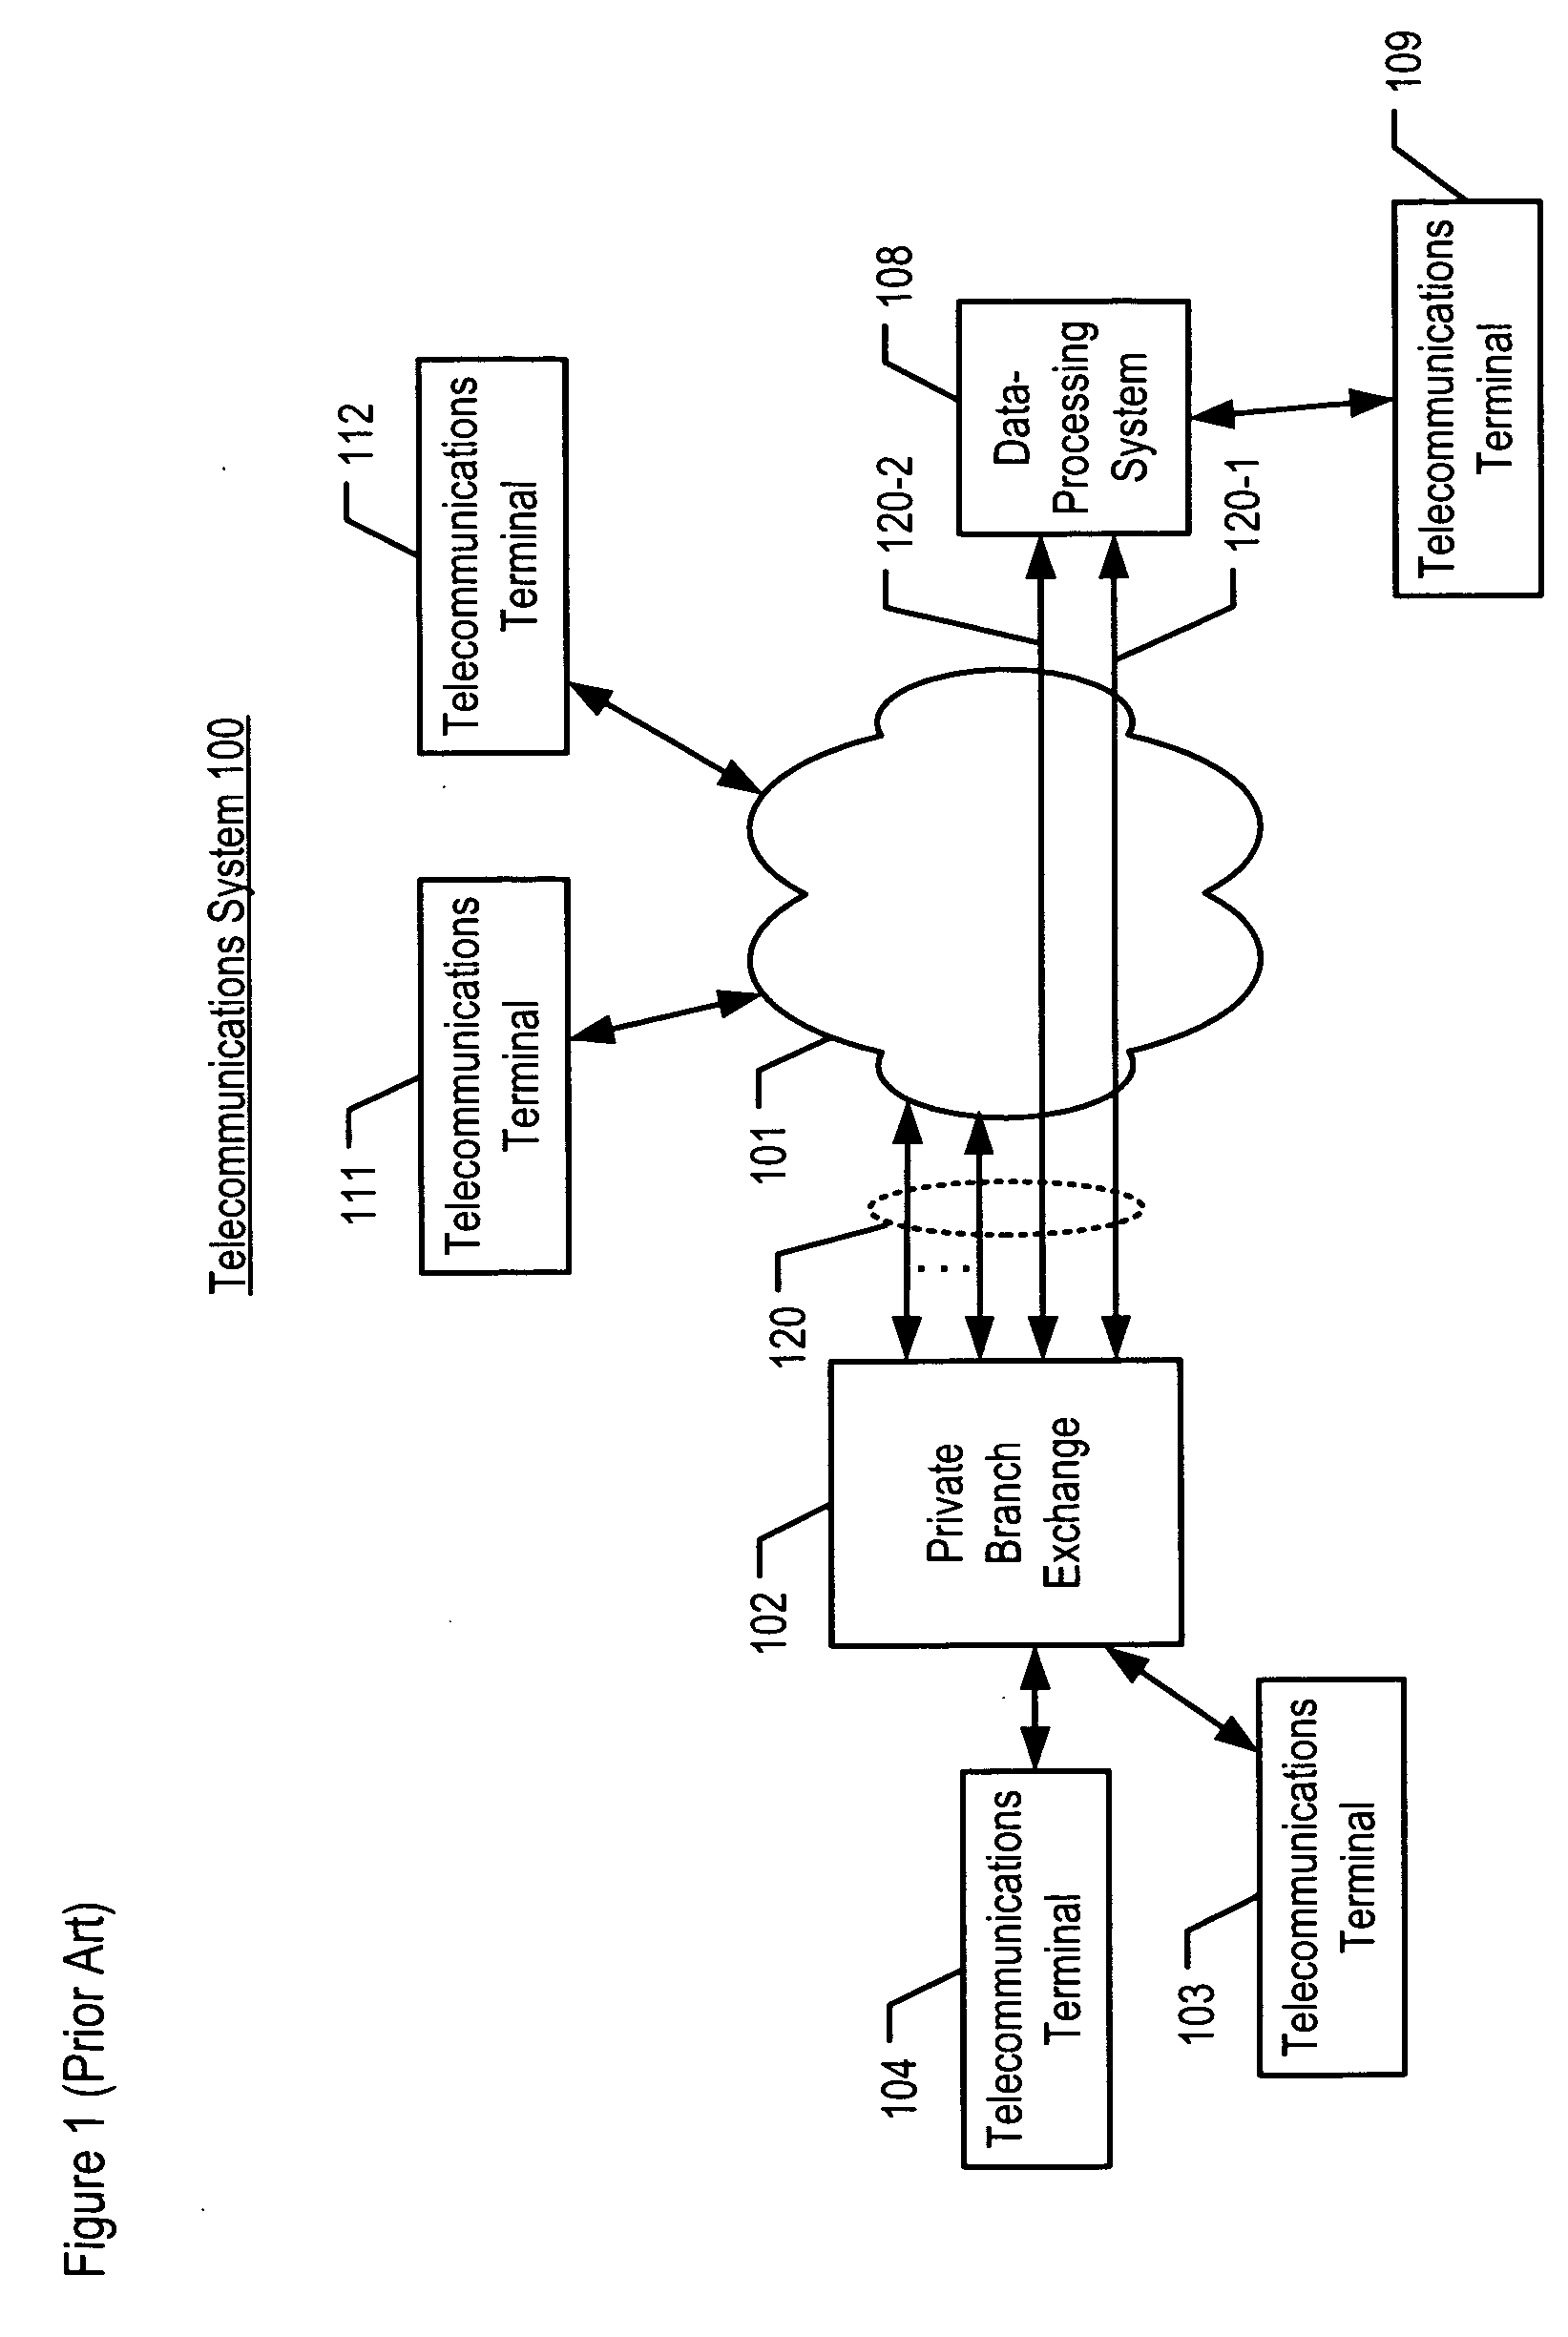 Managing held telephone calls at the call-forwarding system